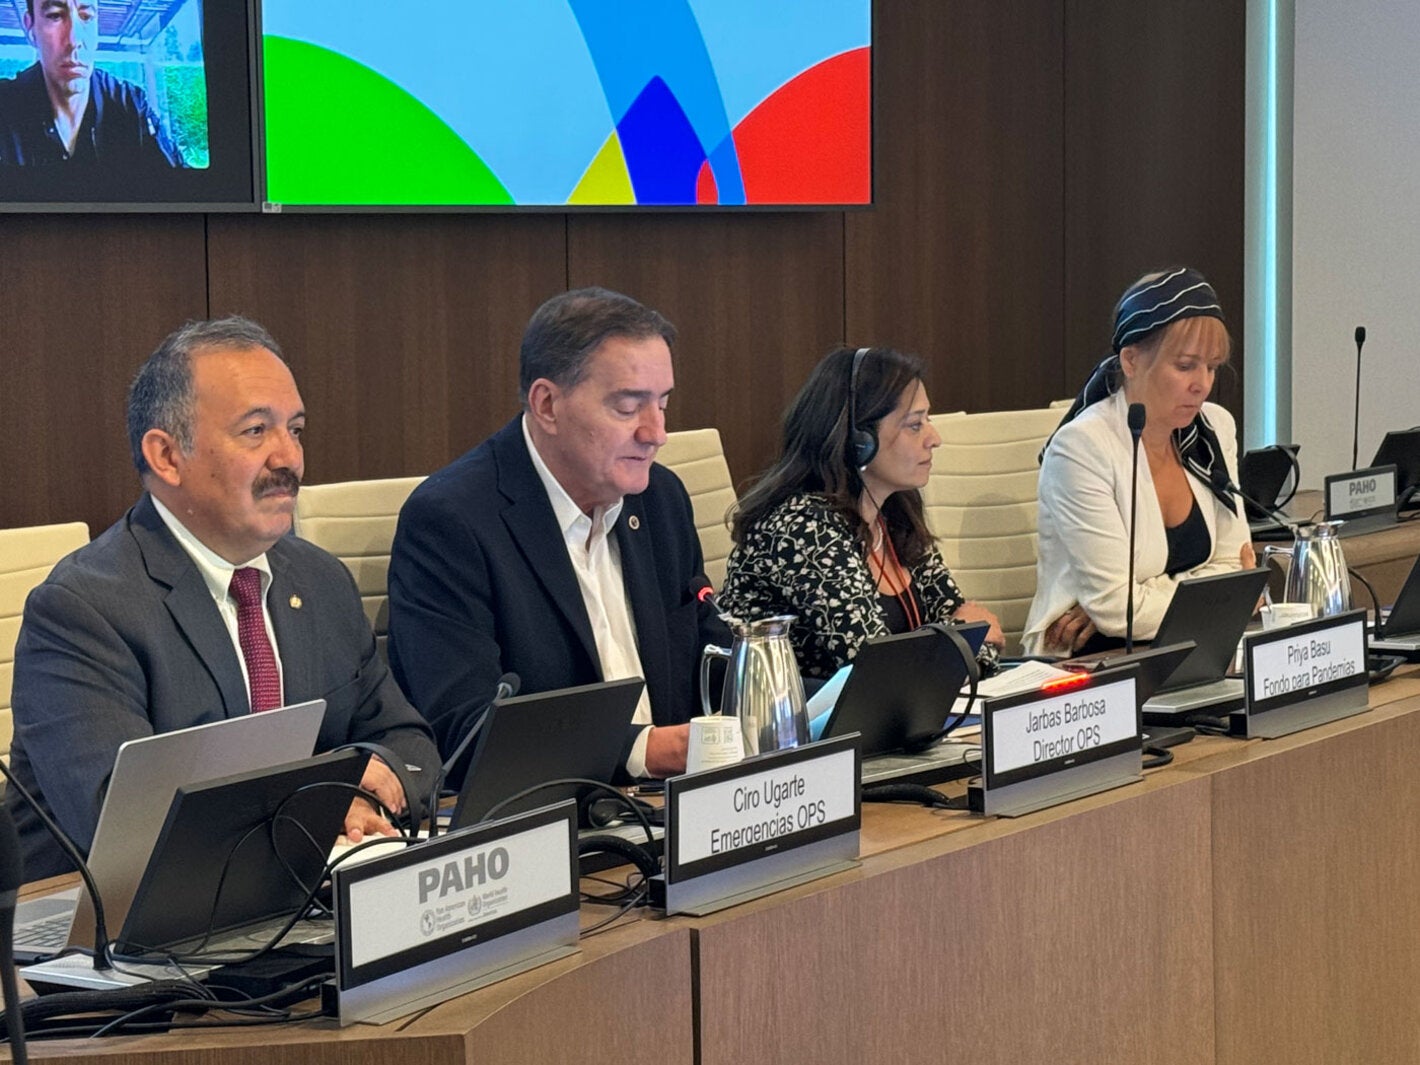 The Pan American Health Organization (PAHO) and the World Bank today launched the PROTECT Project, an initiative to improve pandemic response in seven South American countries.